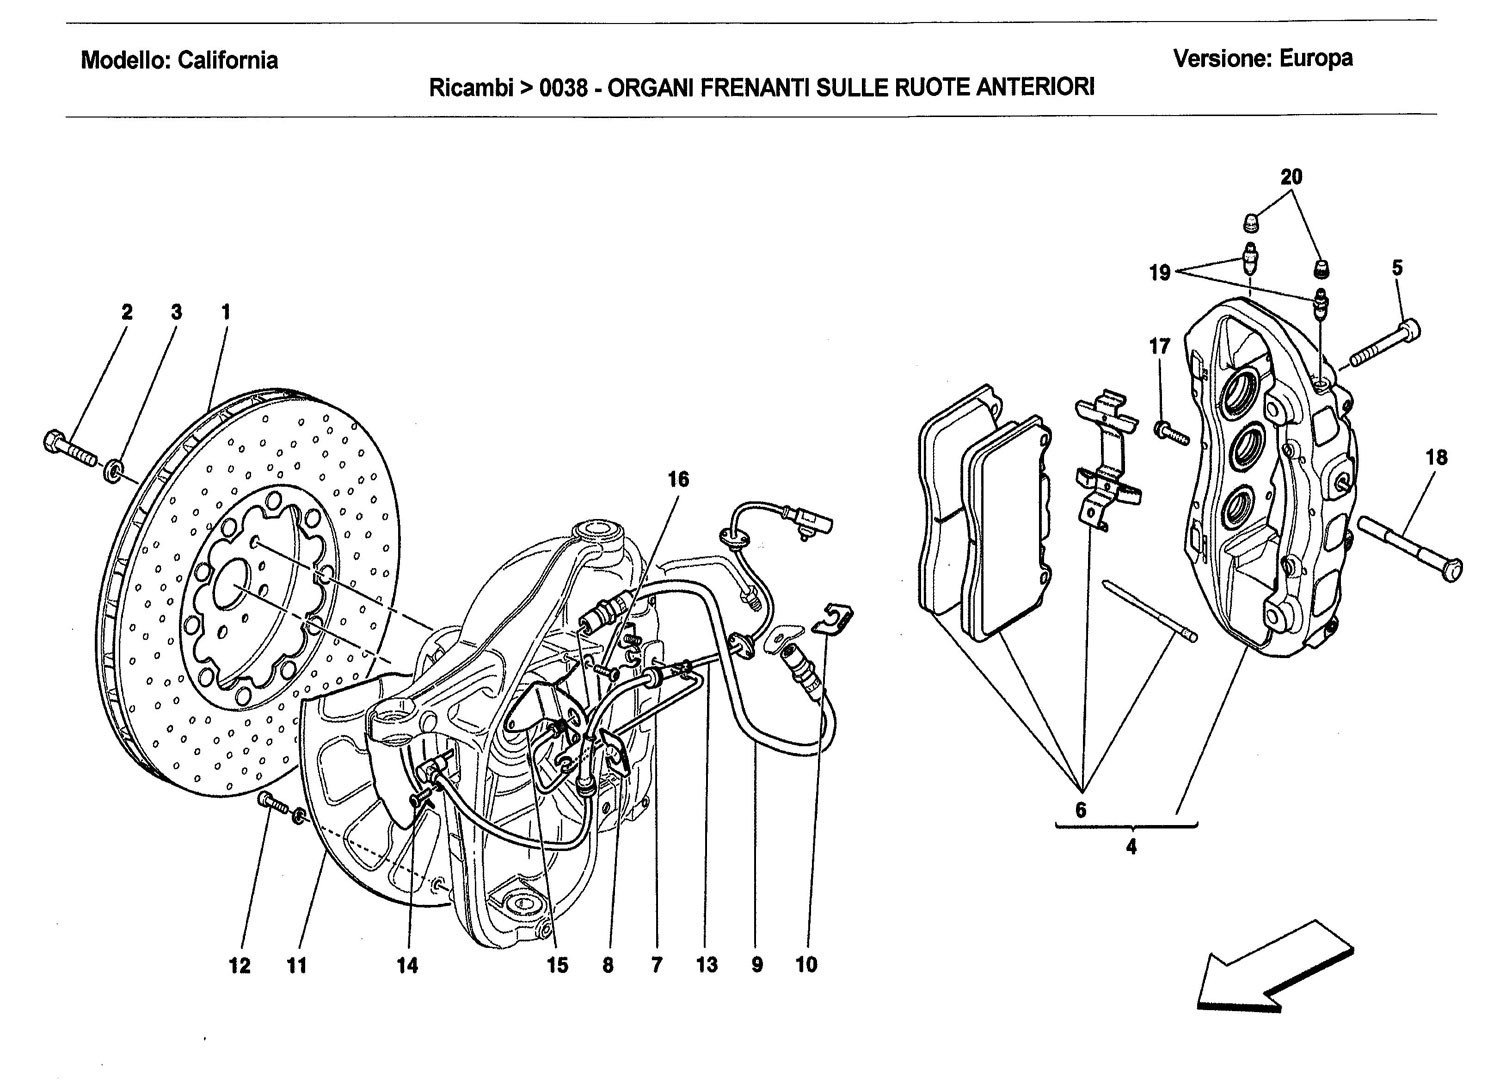 FRONT WHEEL BRAKE SYSTEM COMPONENTS